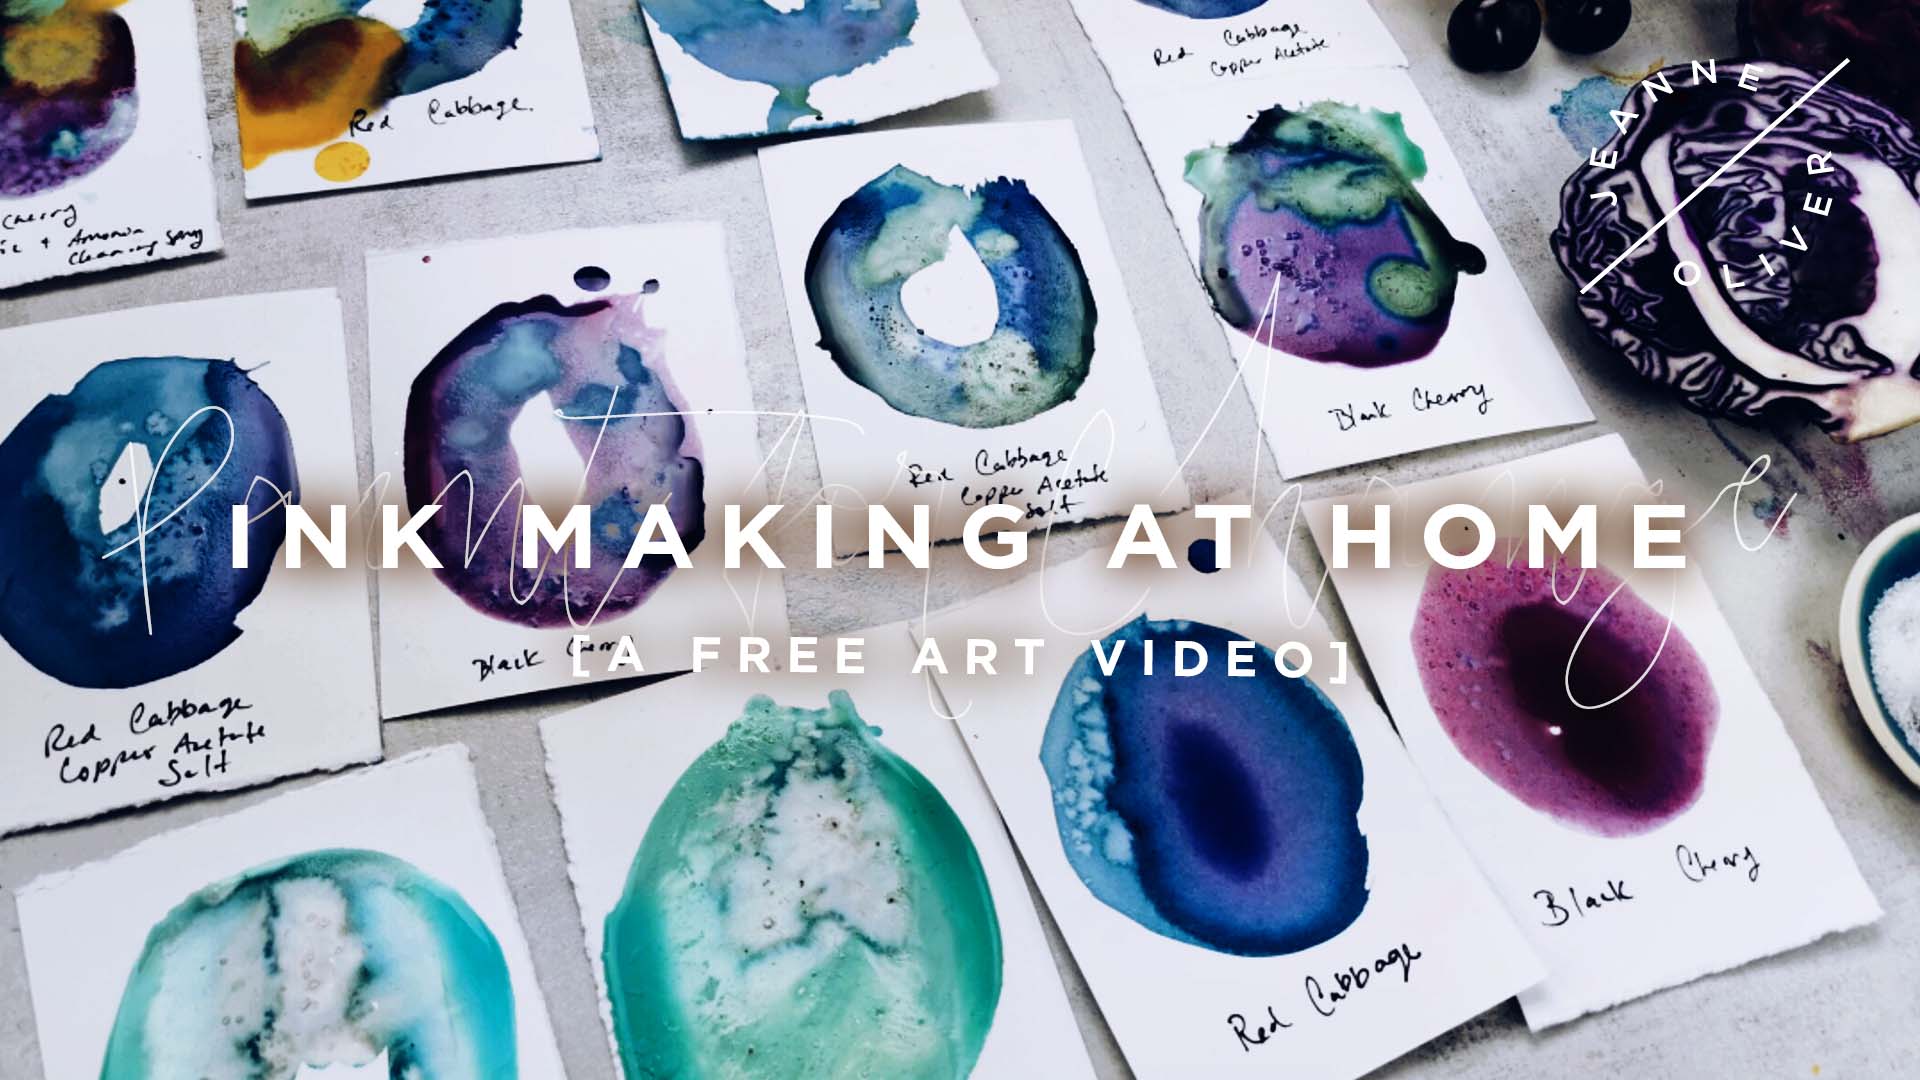 Free Art Video | Making Ink at Home with Auria Bohn